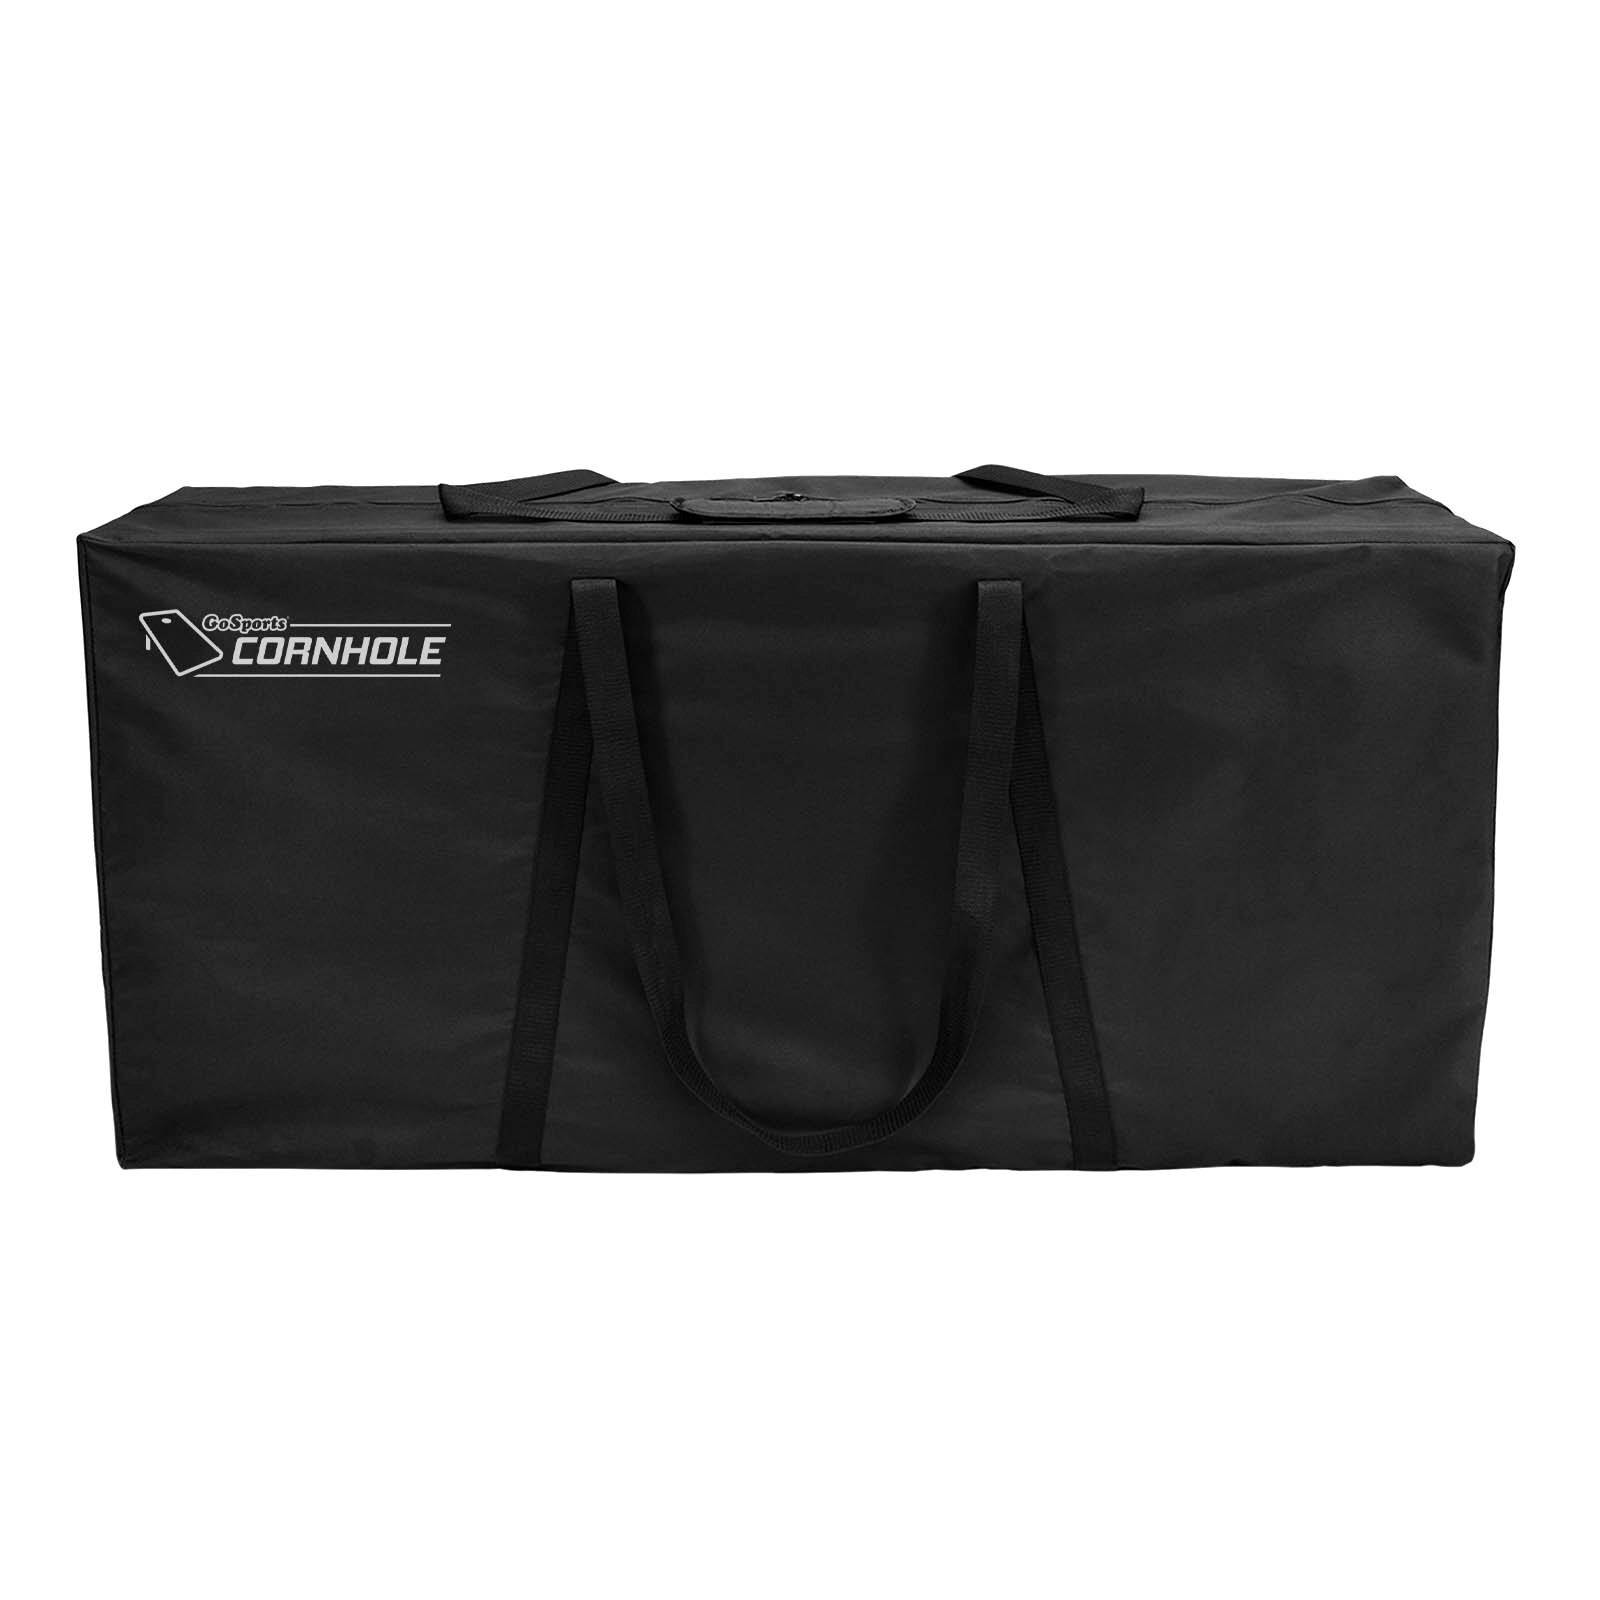 Tote Carry Bags *holds up to 10 cornhole bags* 